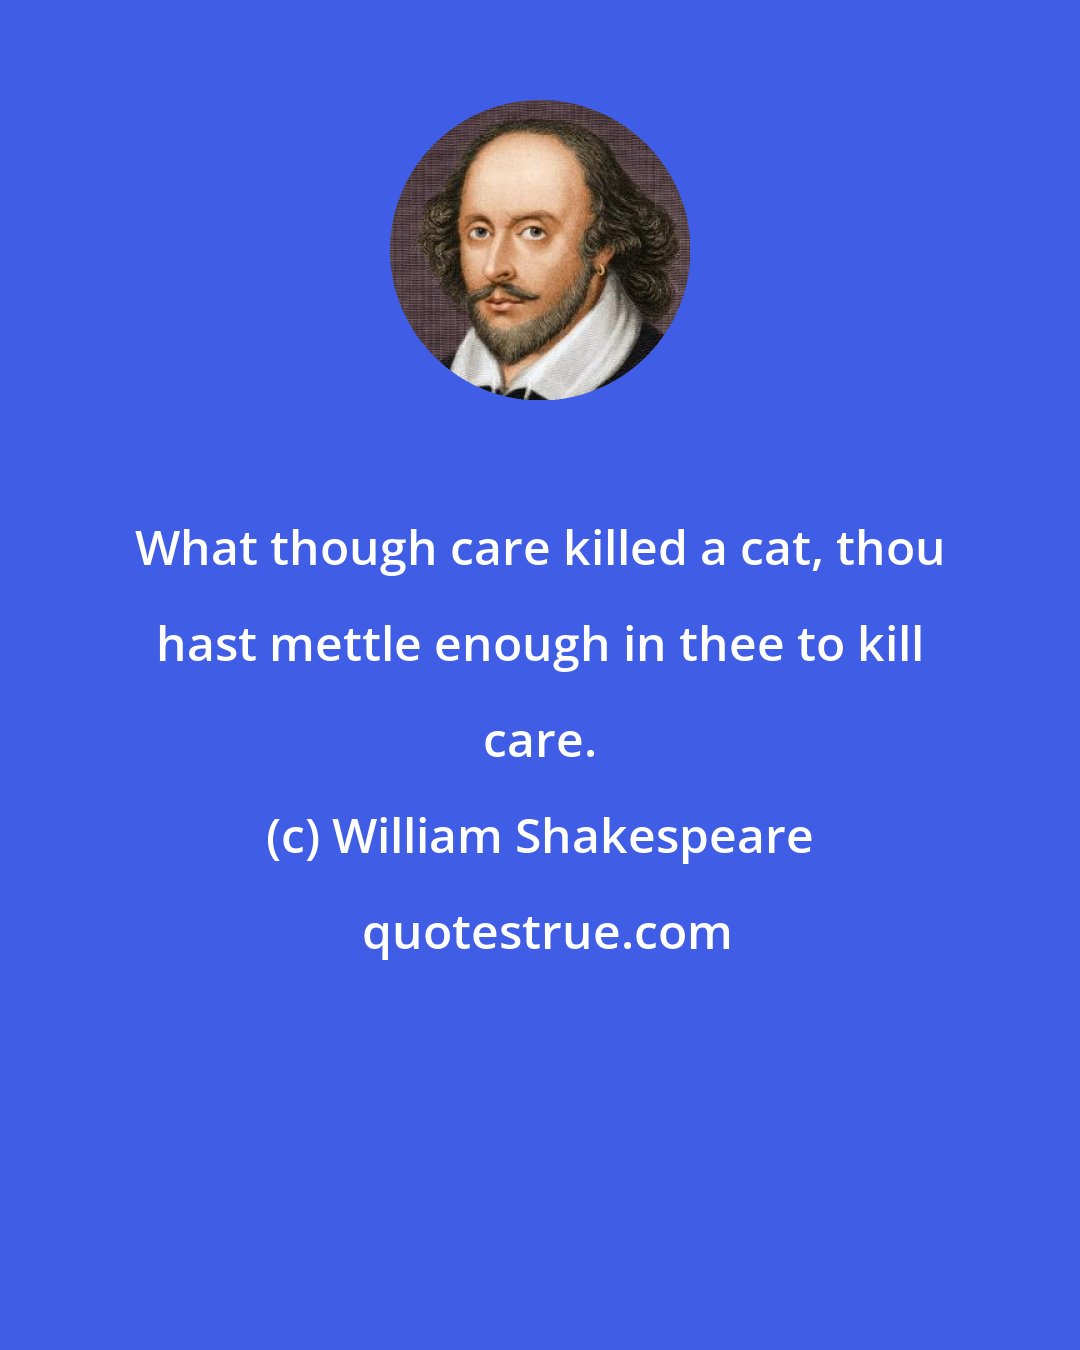 William Shakespeare: What though care killed a cat, thou hast mettle enough in thee to kill care.